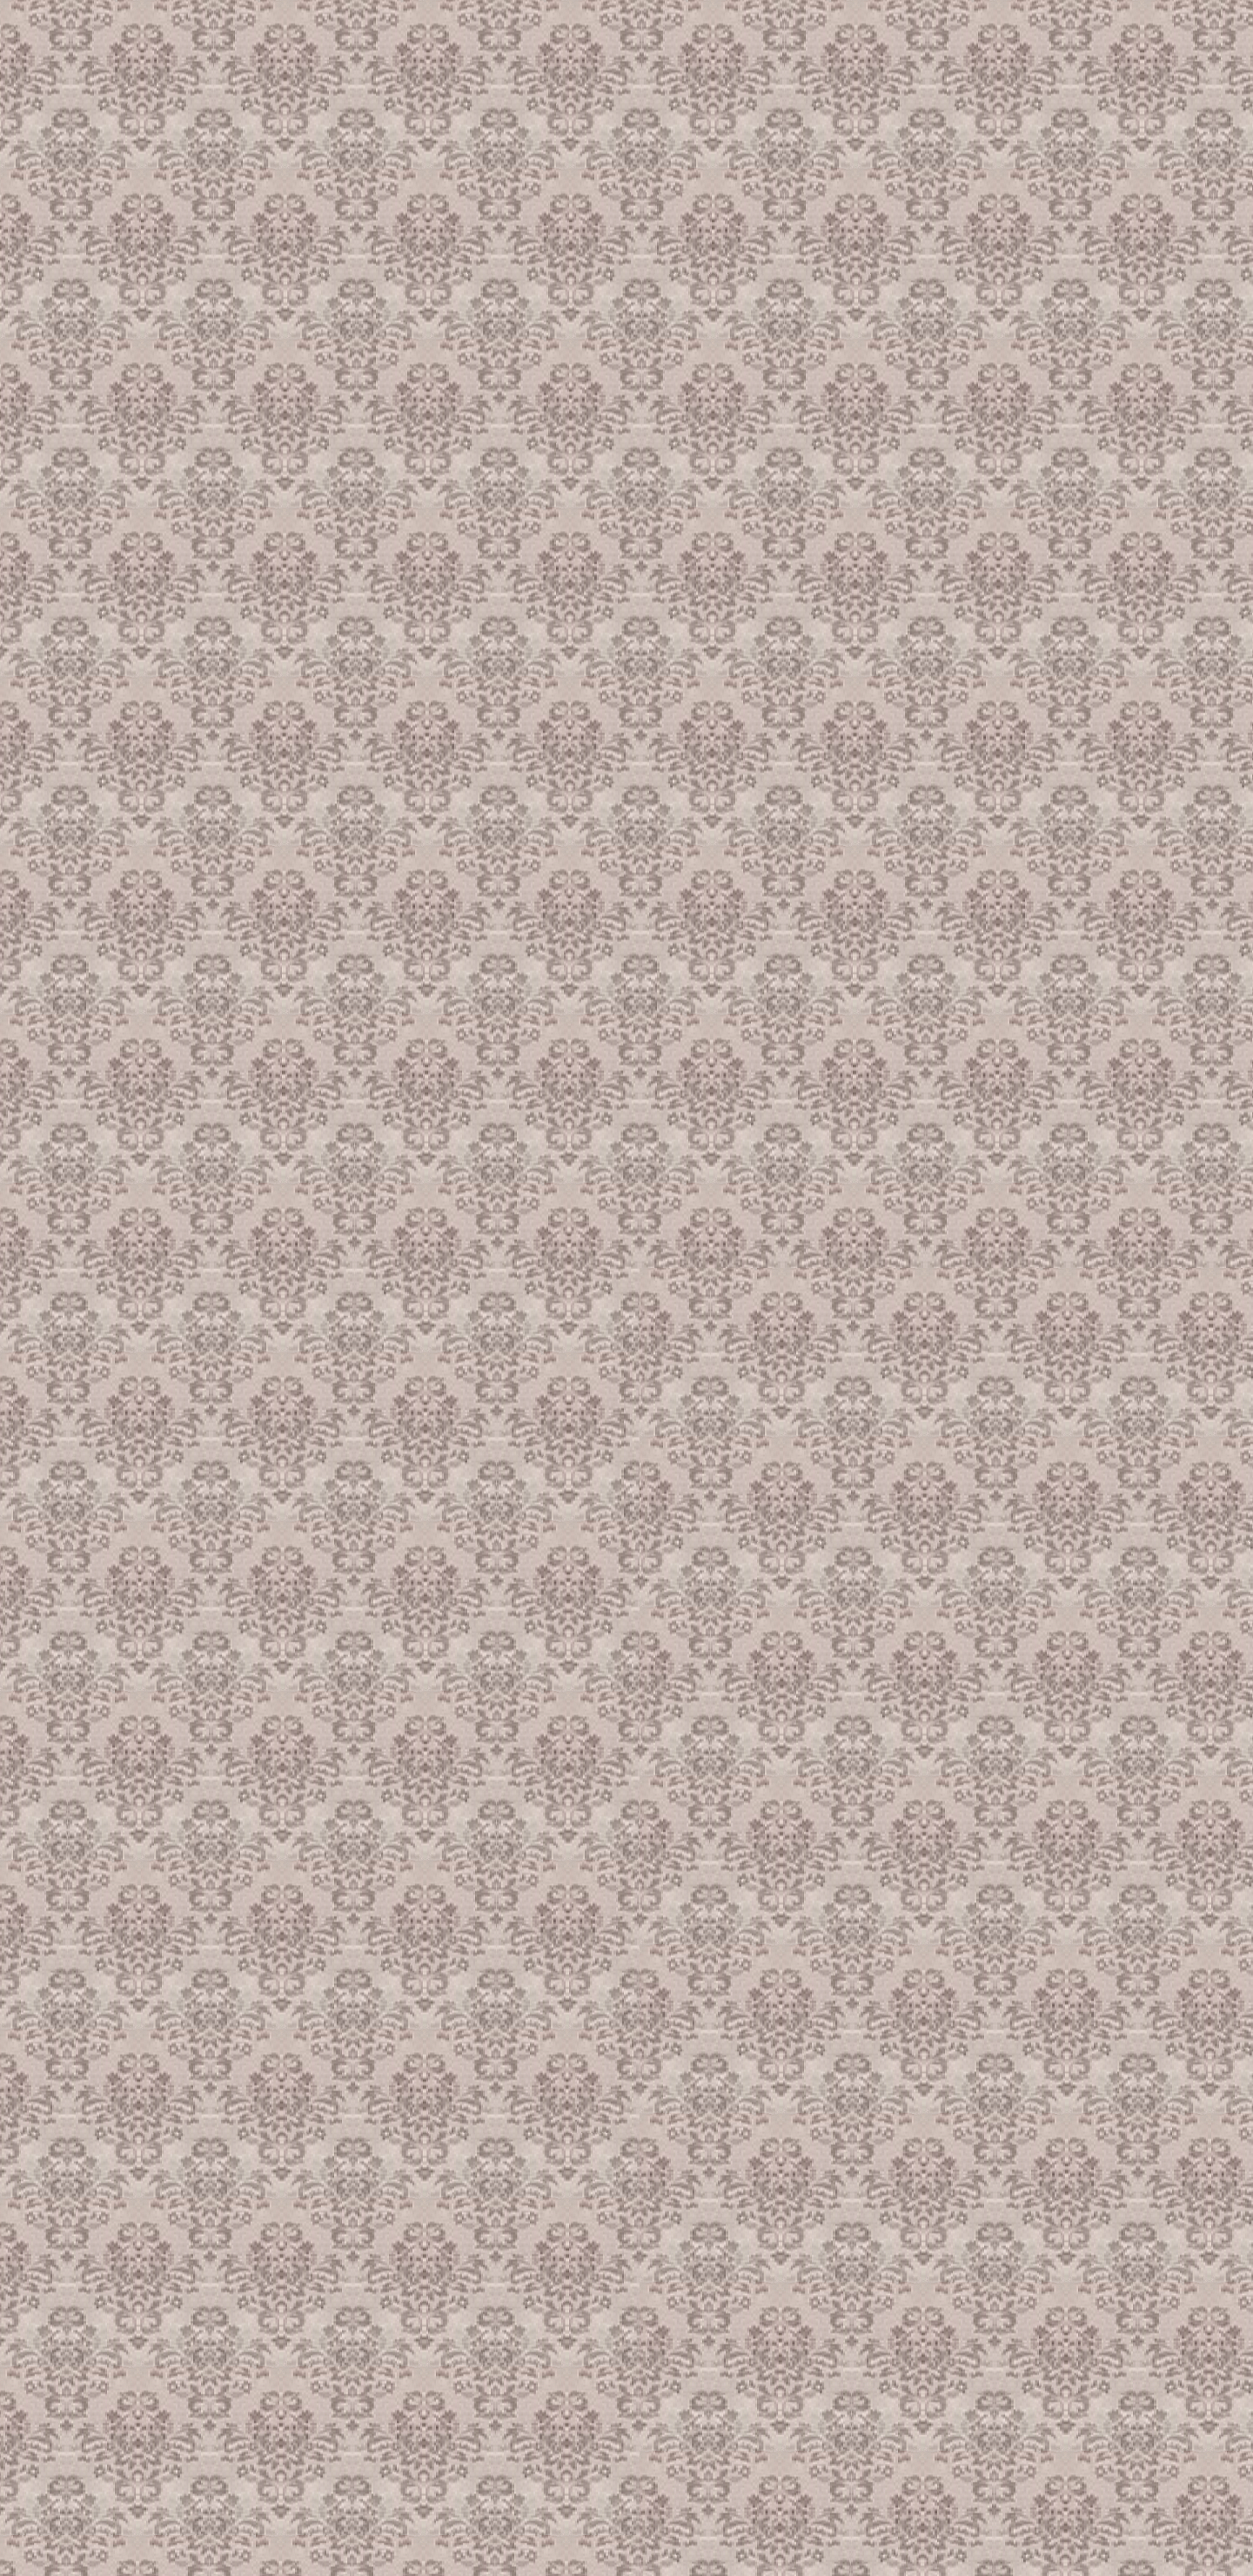 Rusty lake wallpaper number heres the wallpaper from alberts room in roots rrustylake